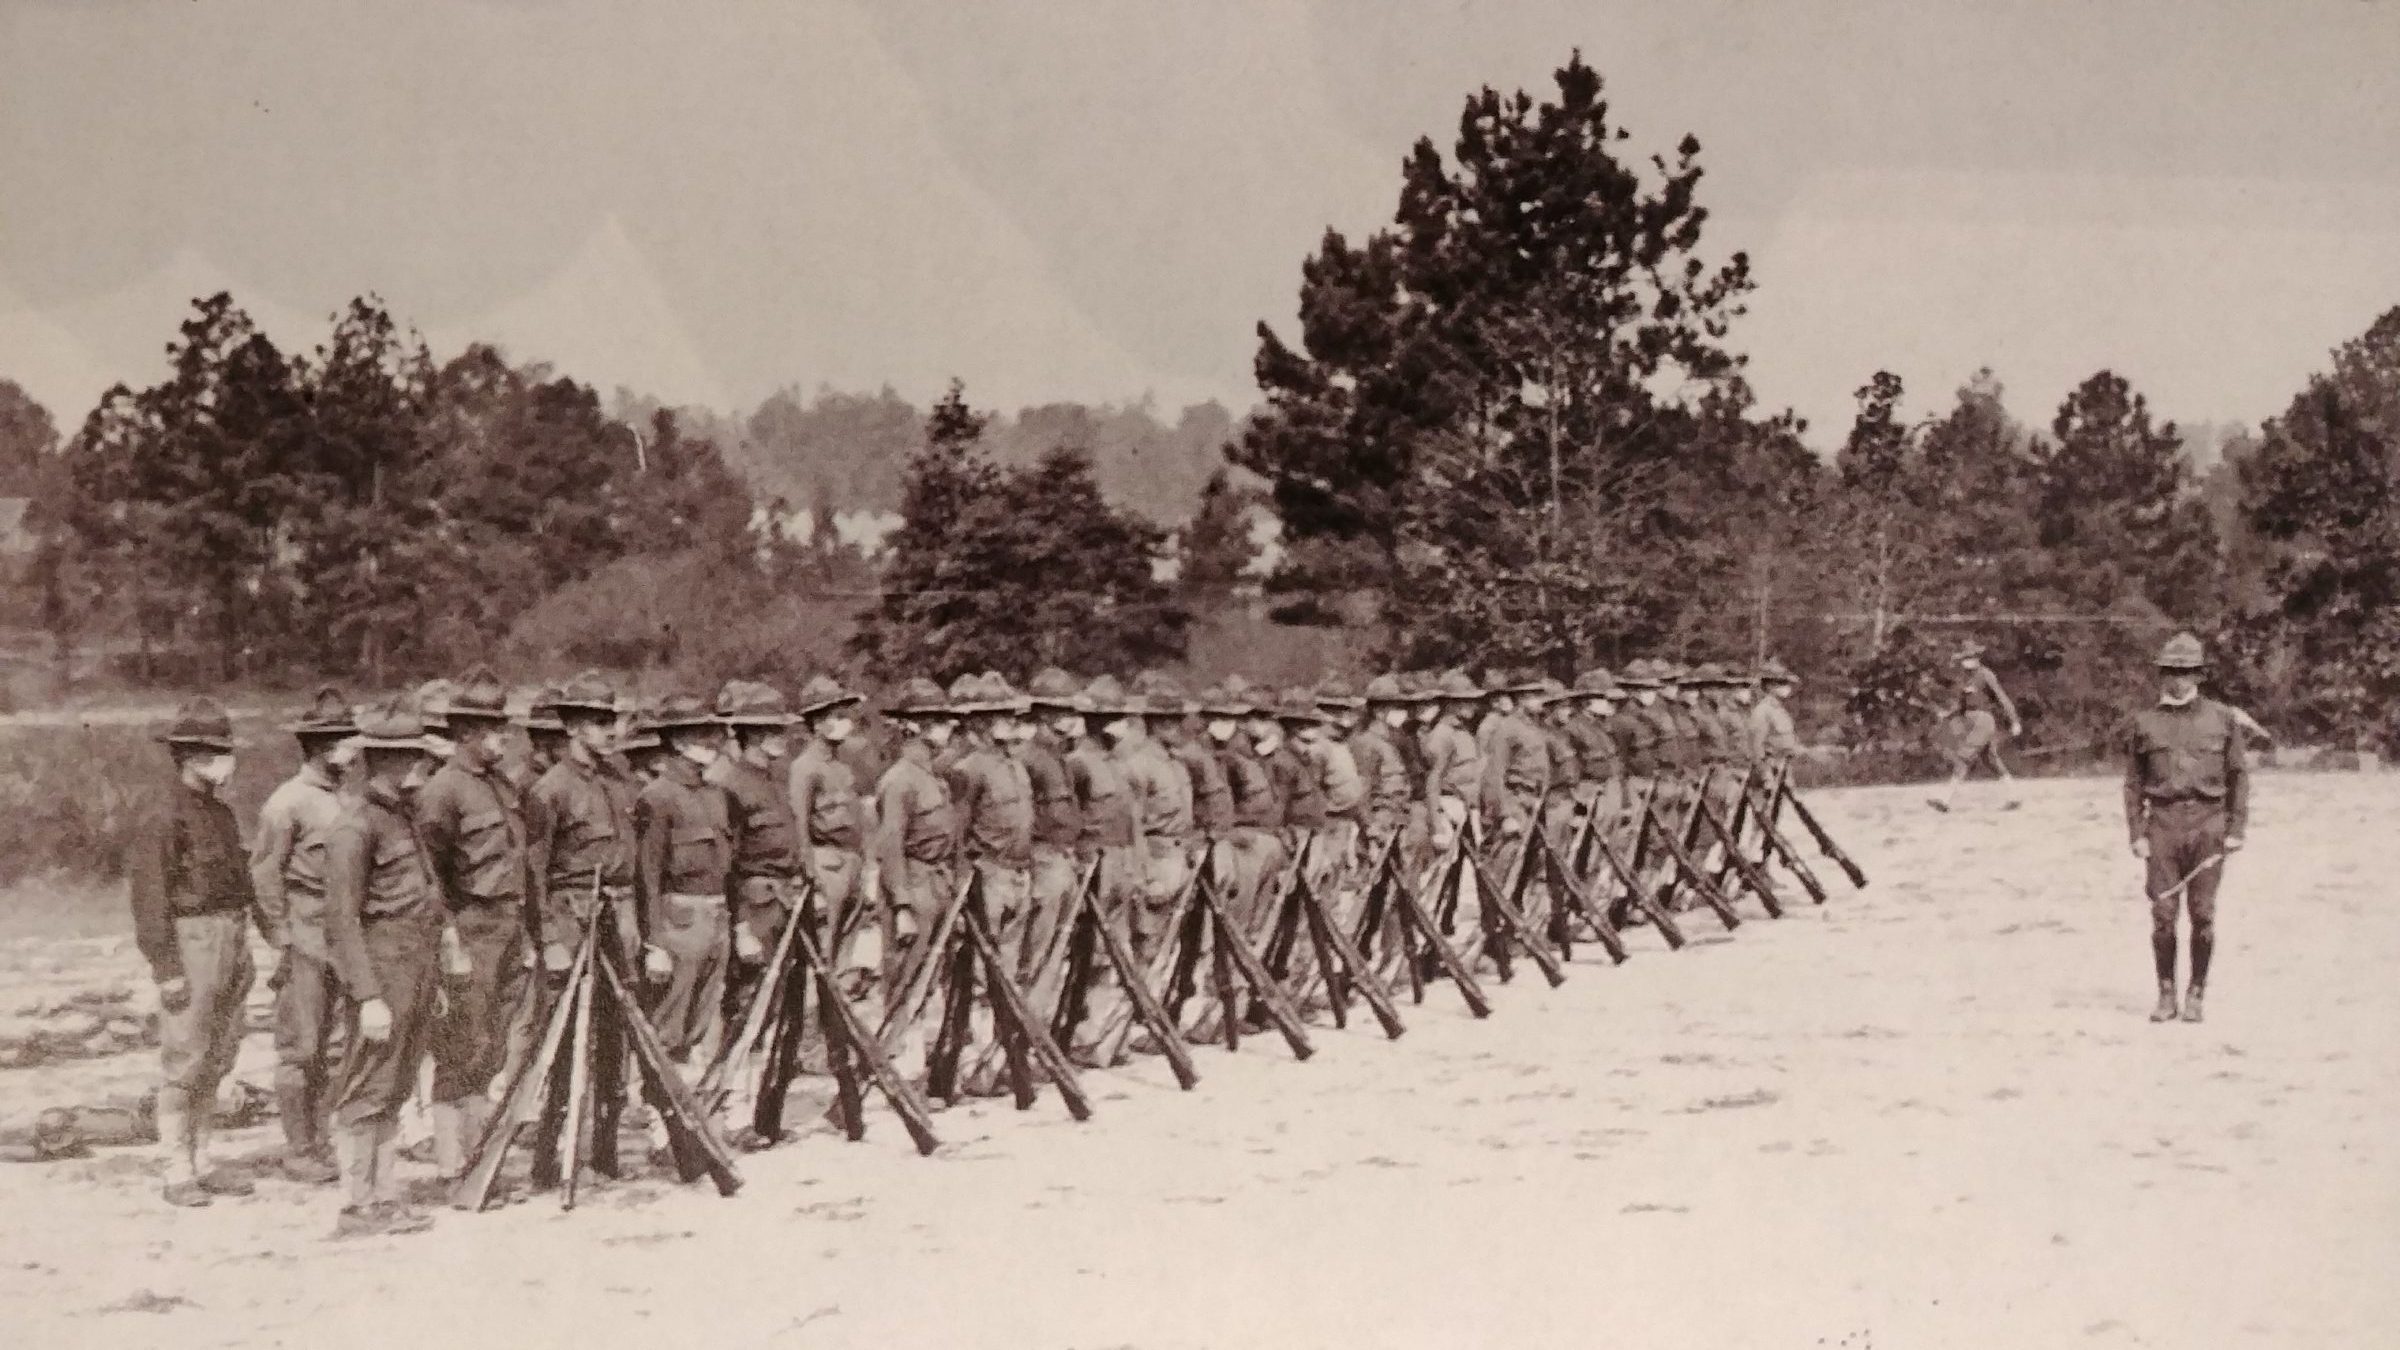 Soldiers in formation at Camp Gordon, many wearing flu masks. (Courtesy of The National Archives)